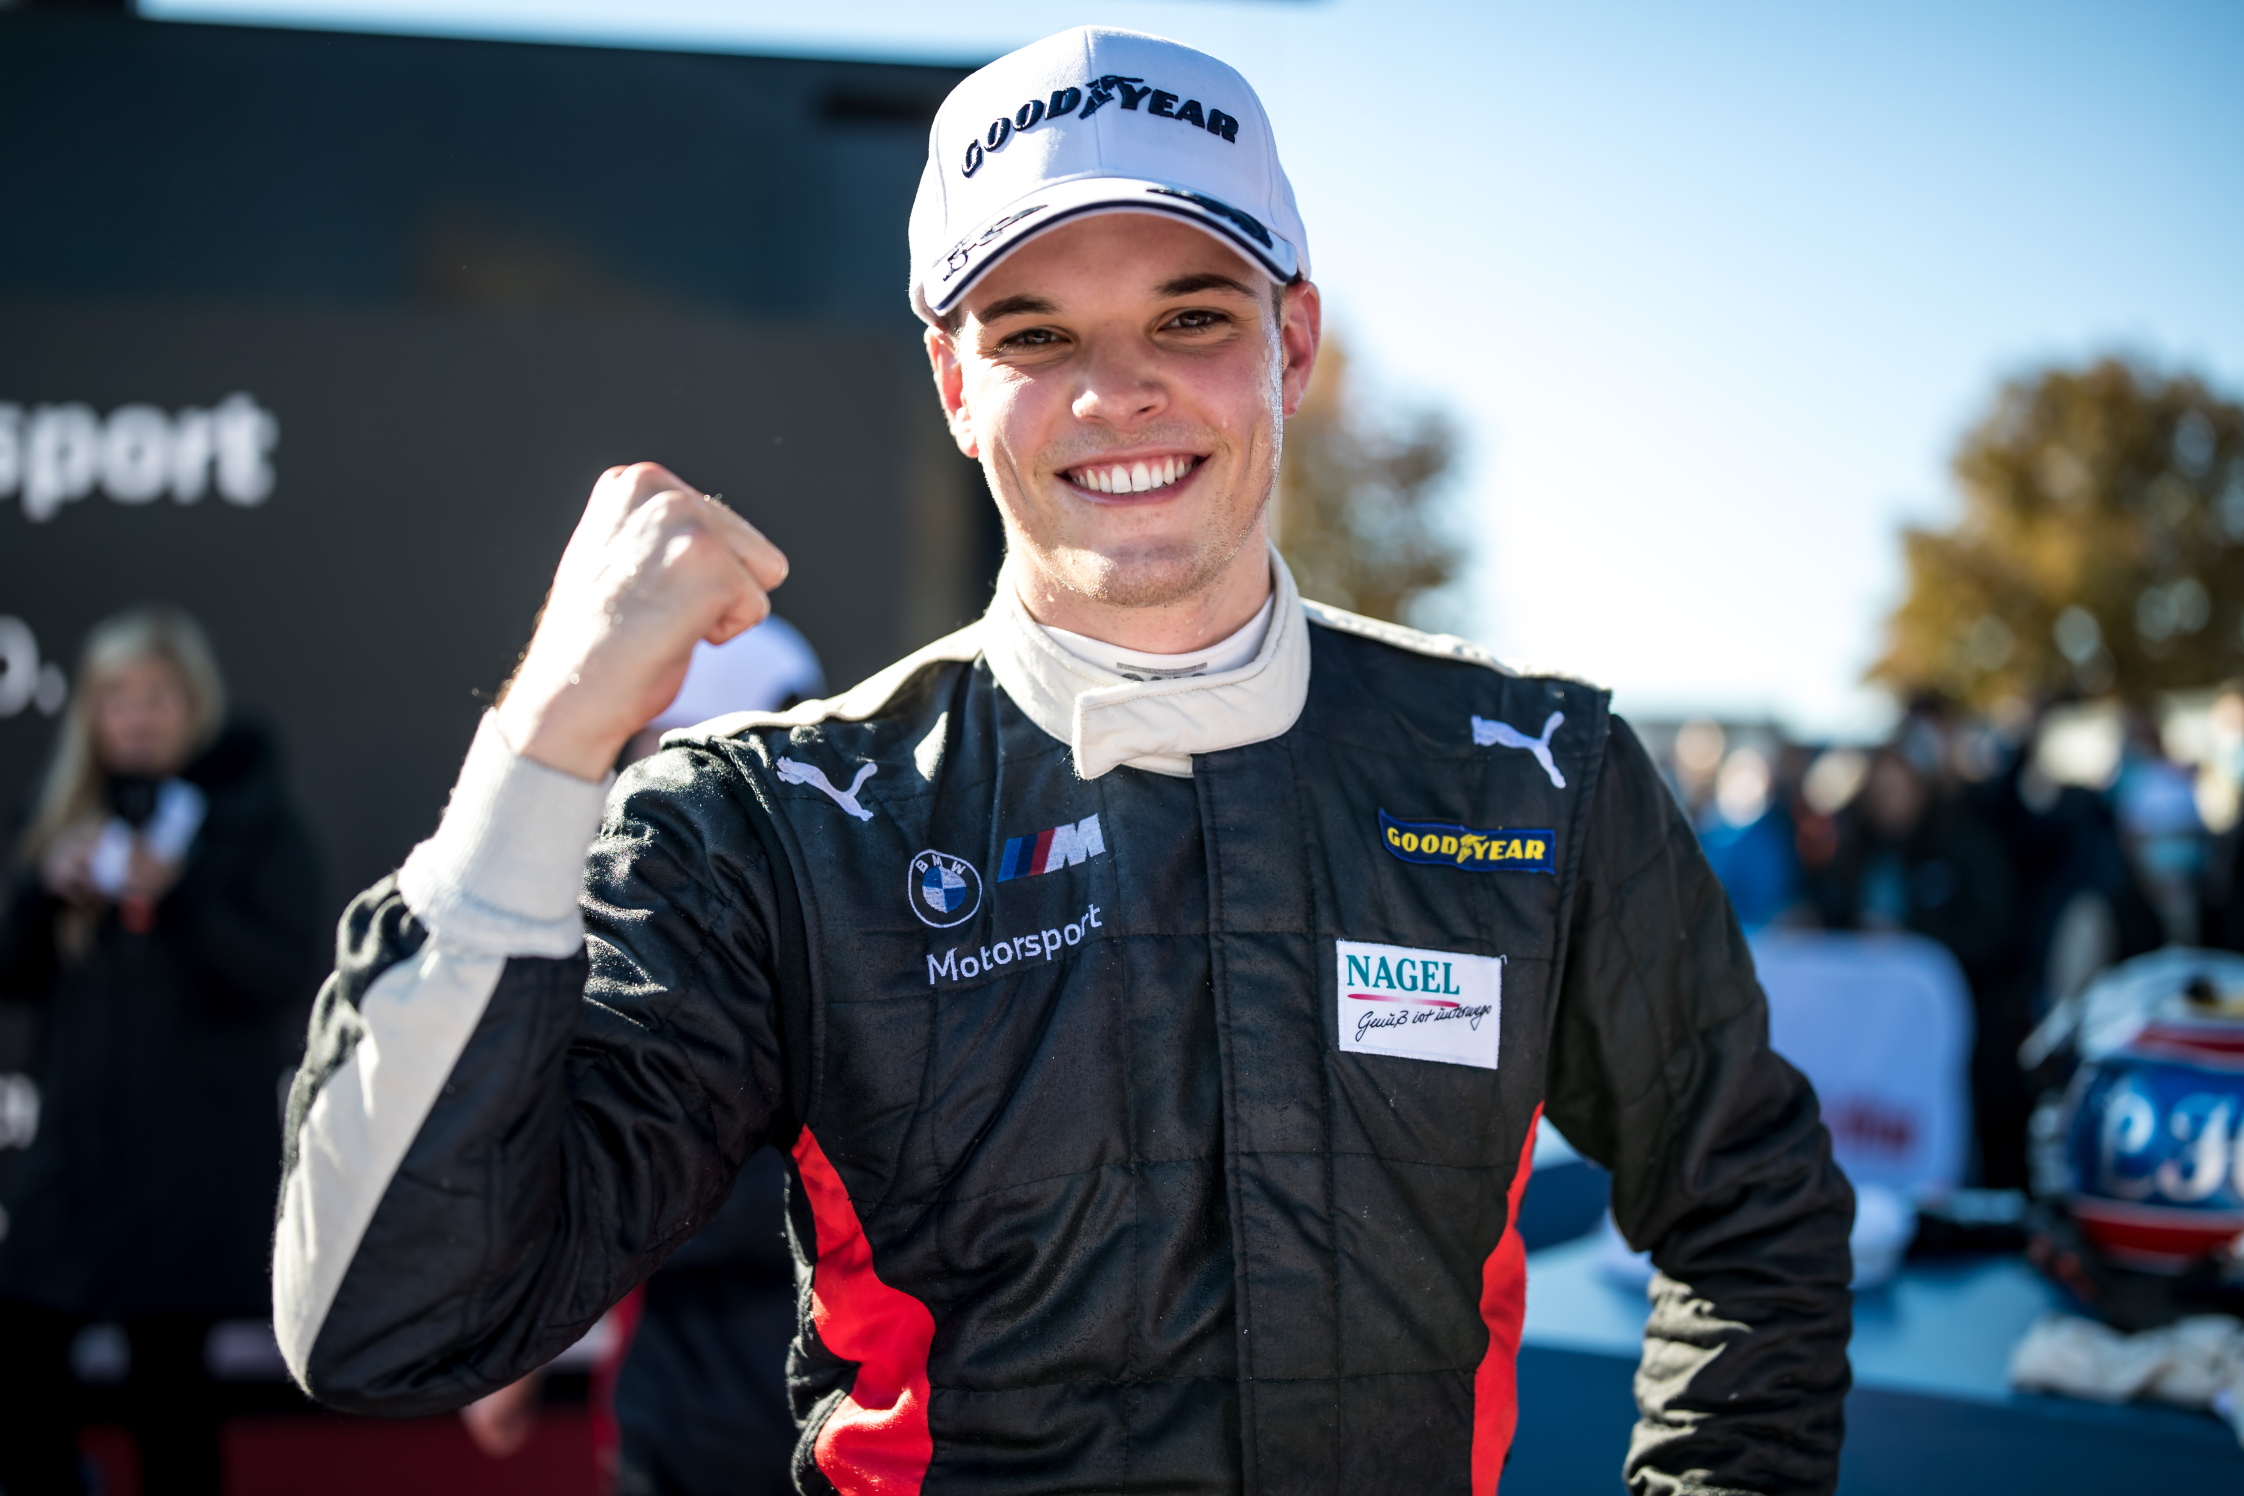 Champion’s interview: Louis Henkefend on the 2022 season and the BMW M2 Cup